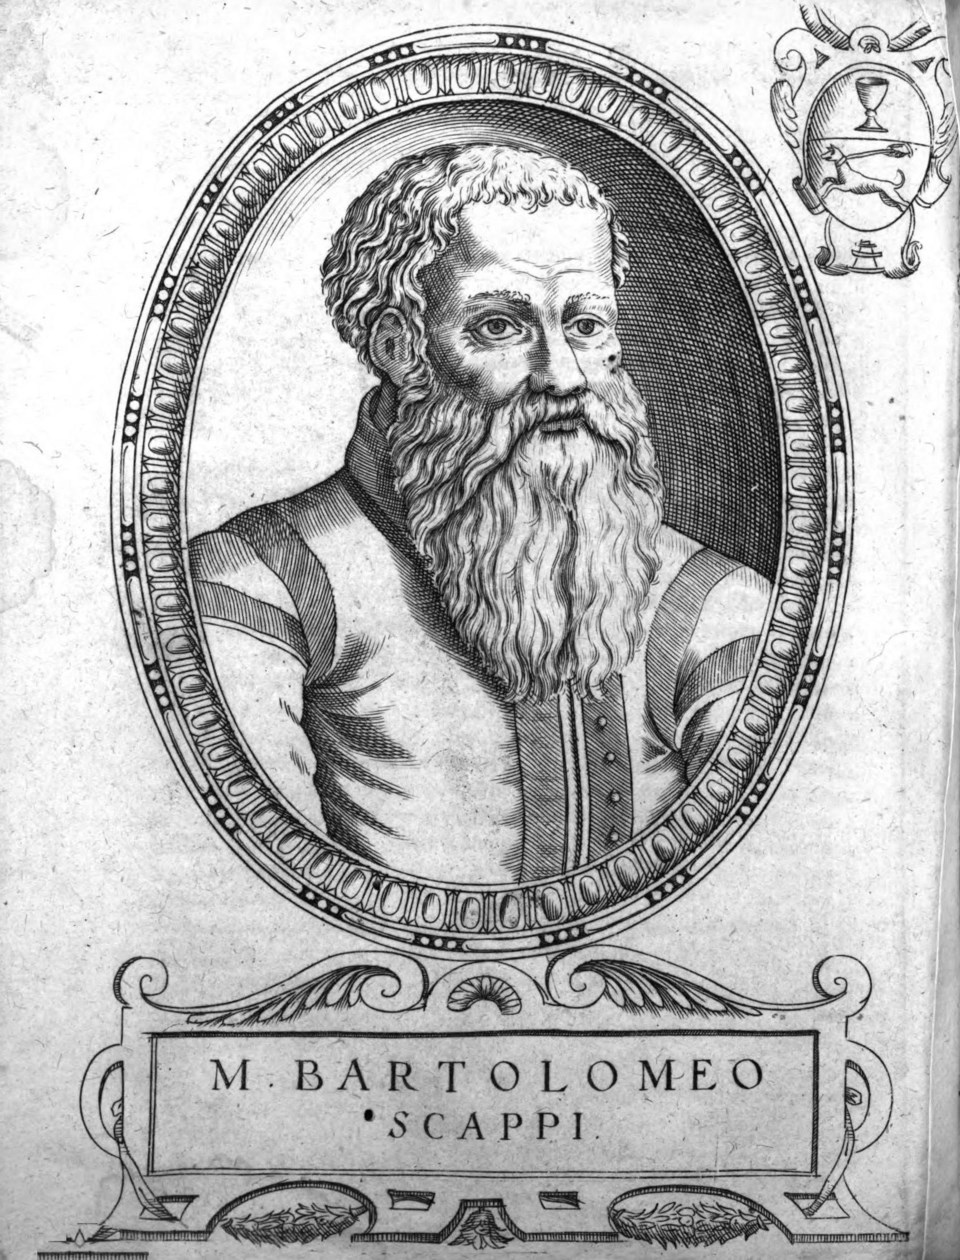 Bartolomeo Scappi, a famous Italian Renaissance chef, is credited with the oldest surviving recipe o